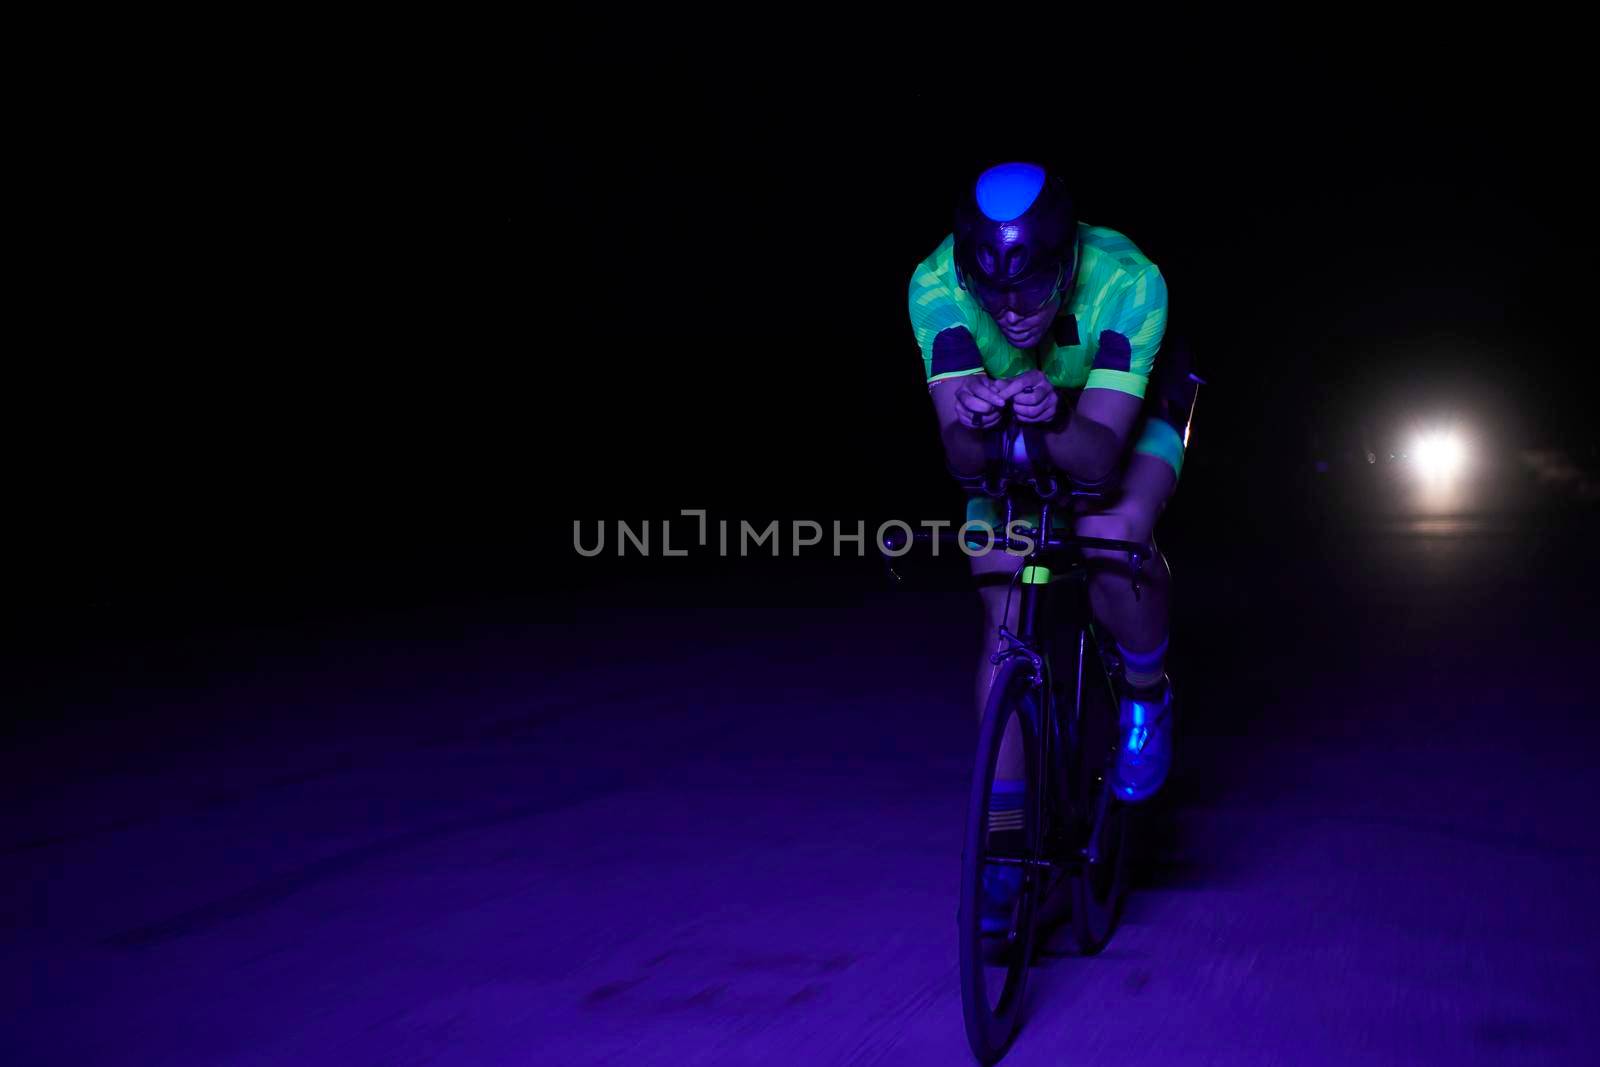 triathlon athlete cycling fast riding professional racing bike at night neon color gel lights